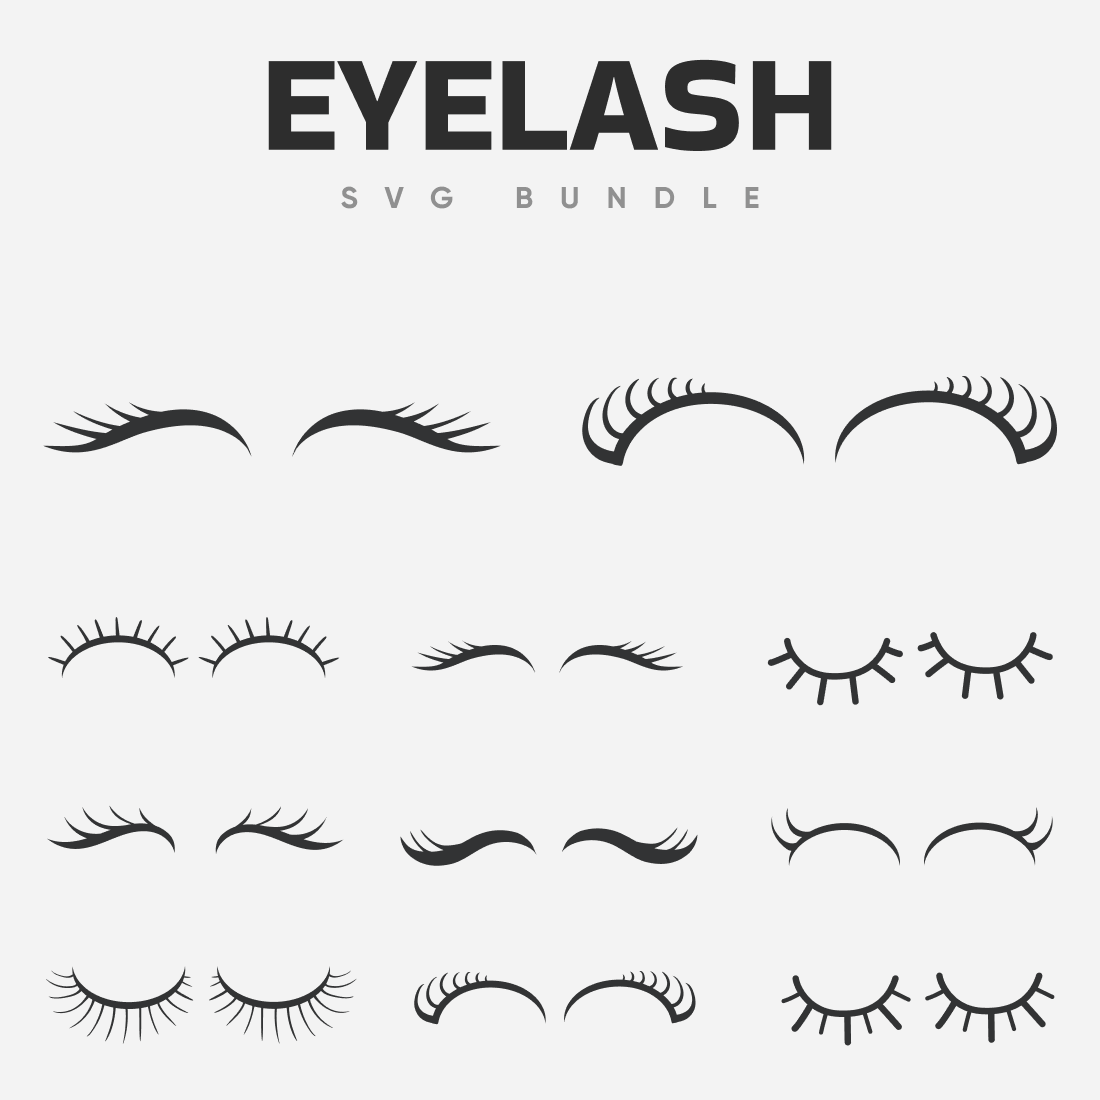 Eyelashes of different sizes and thicknesses.